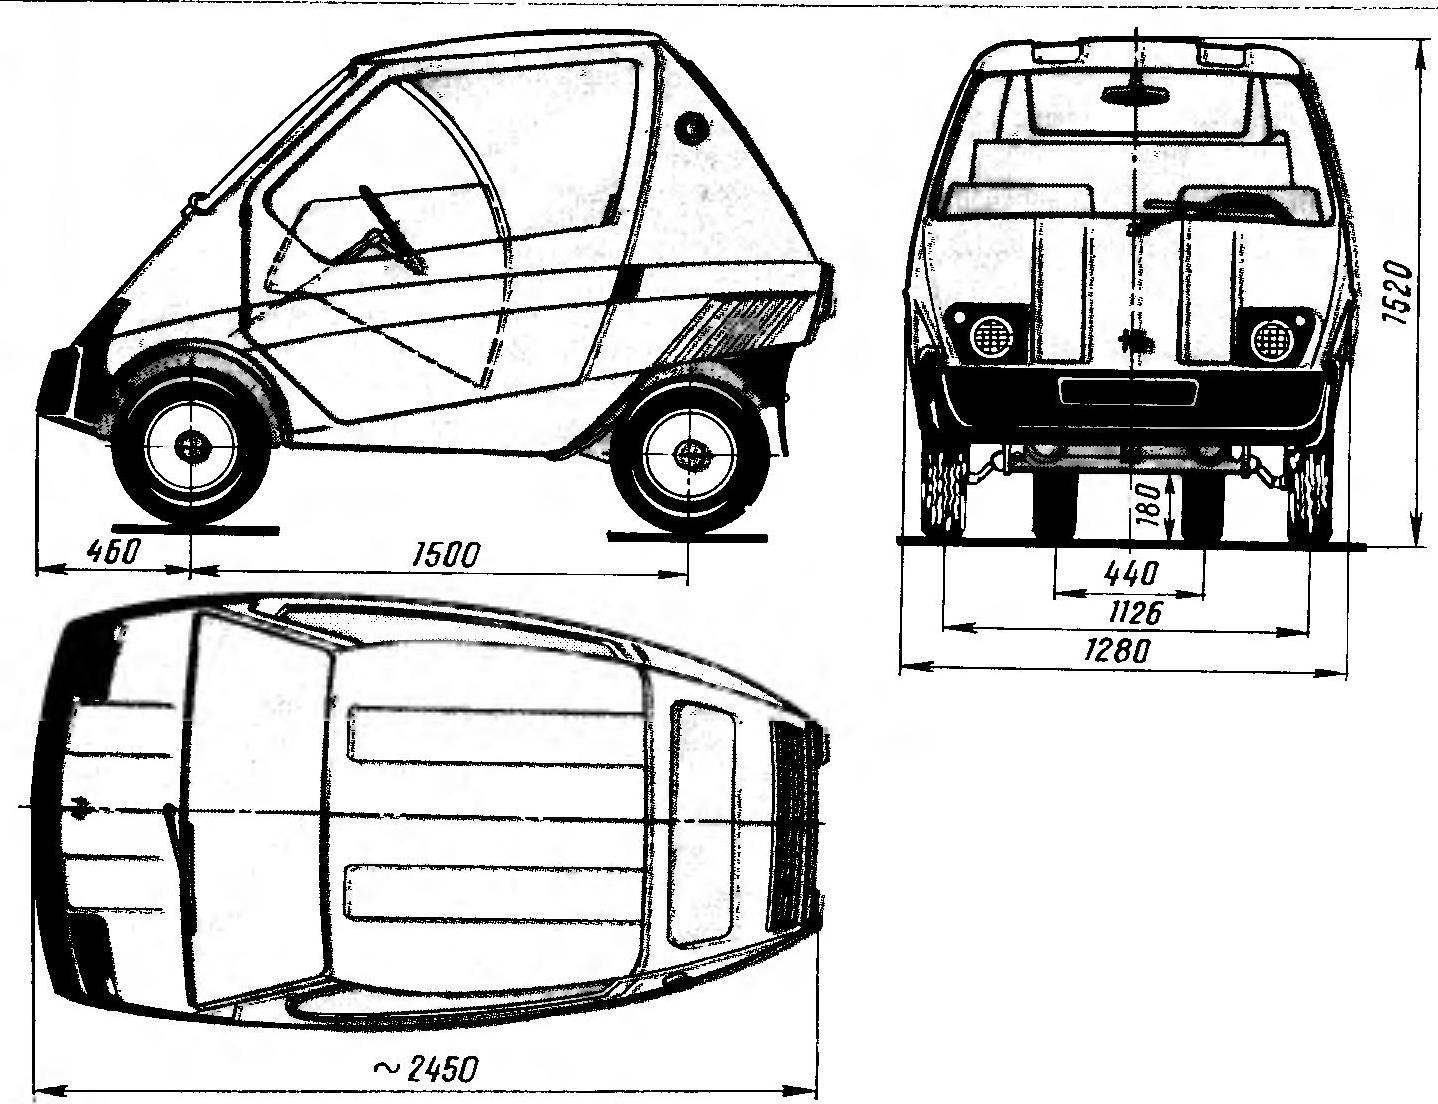 R and S. 1. Double compact city car 